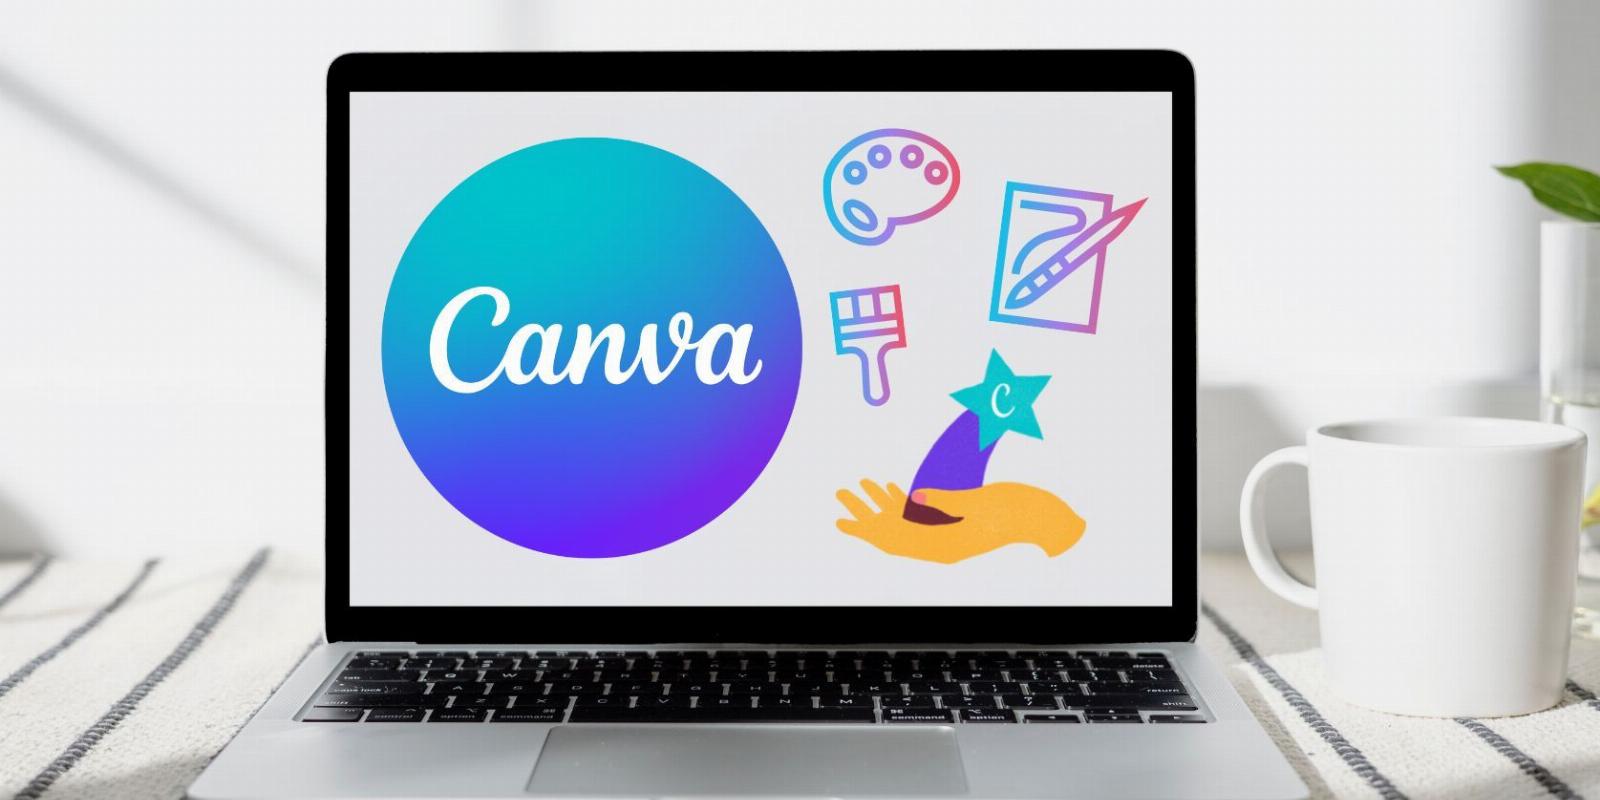 How to Make a Table in Canva